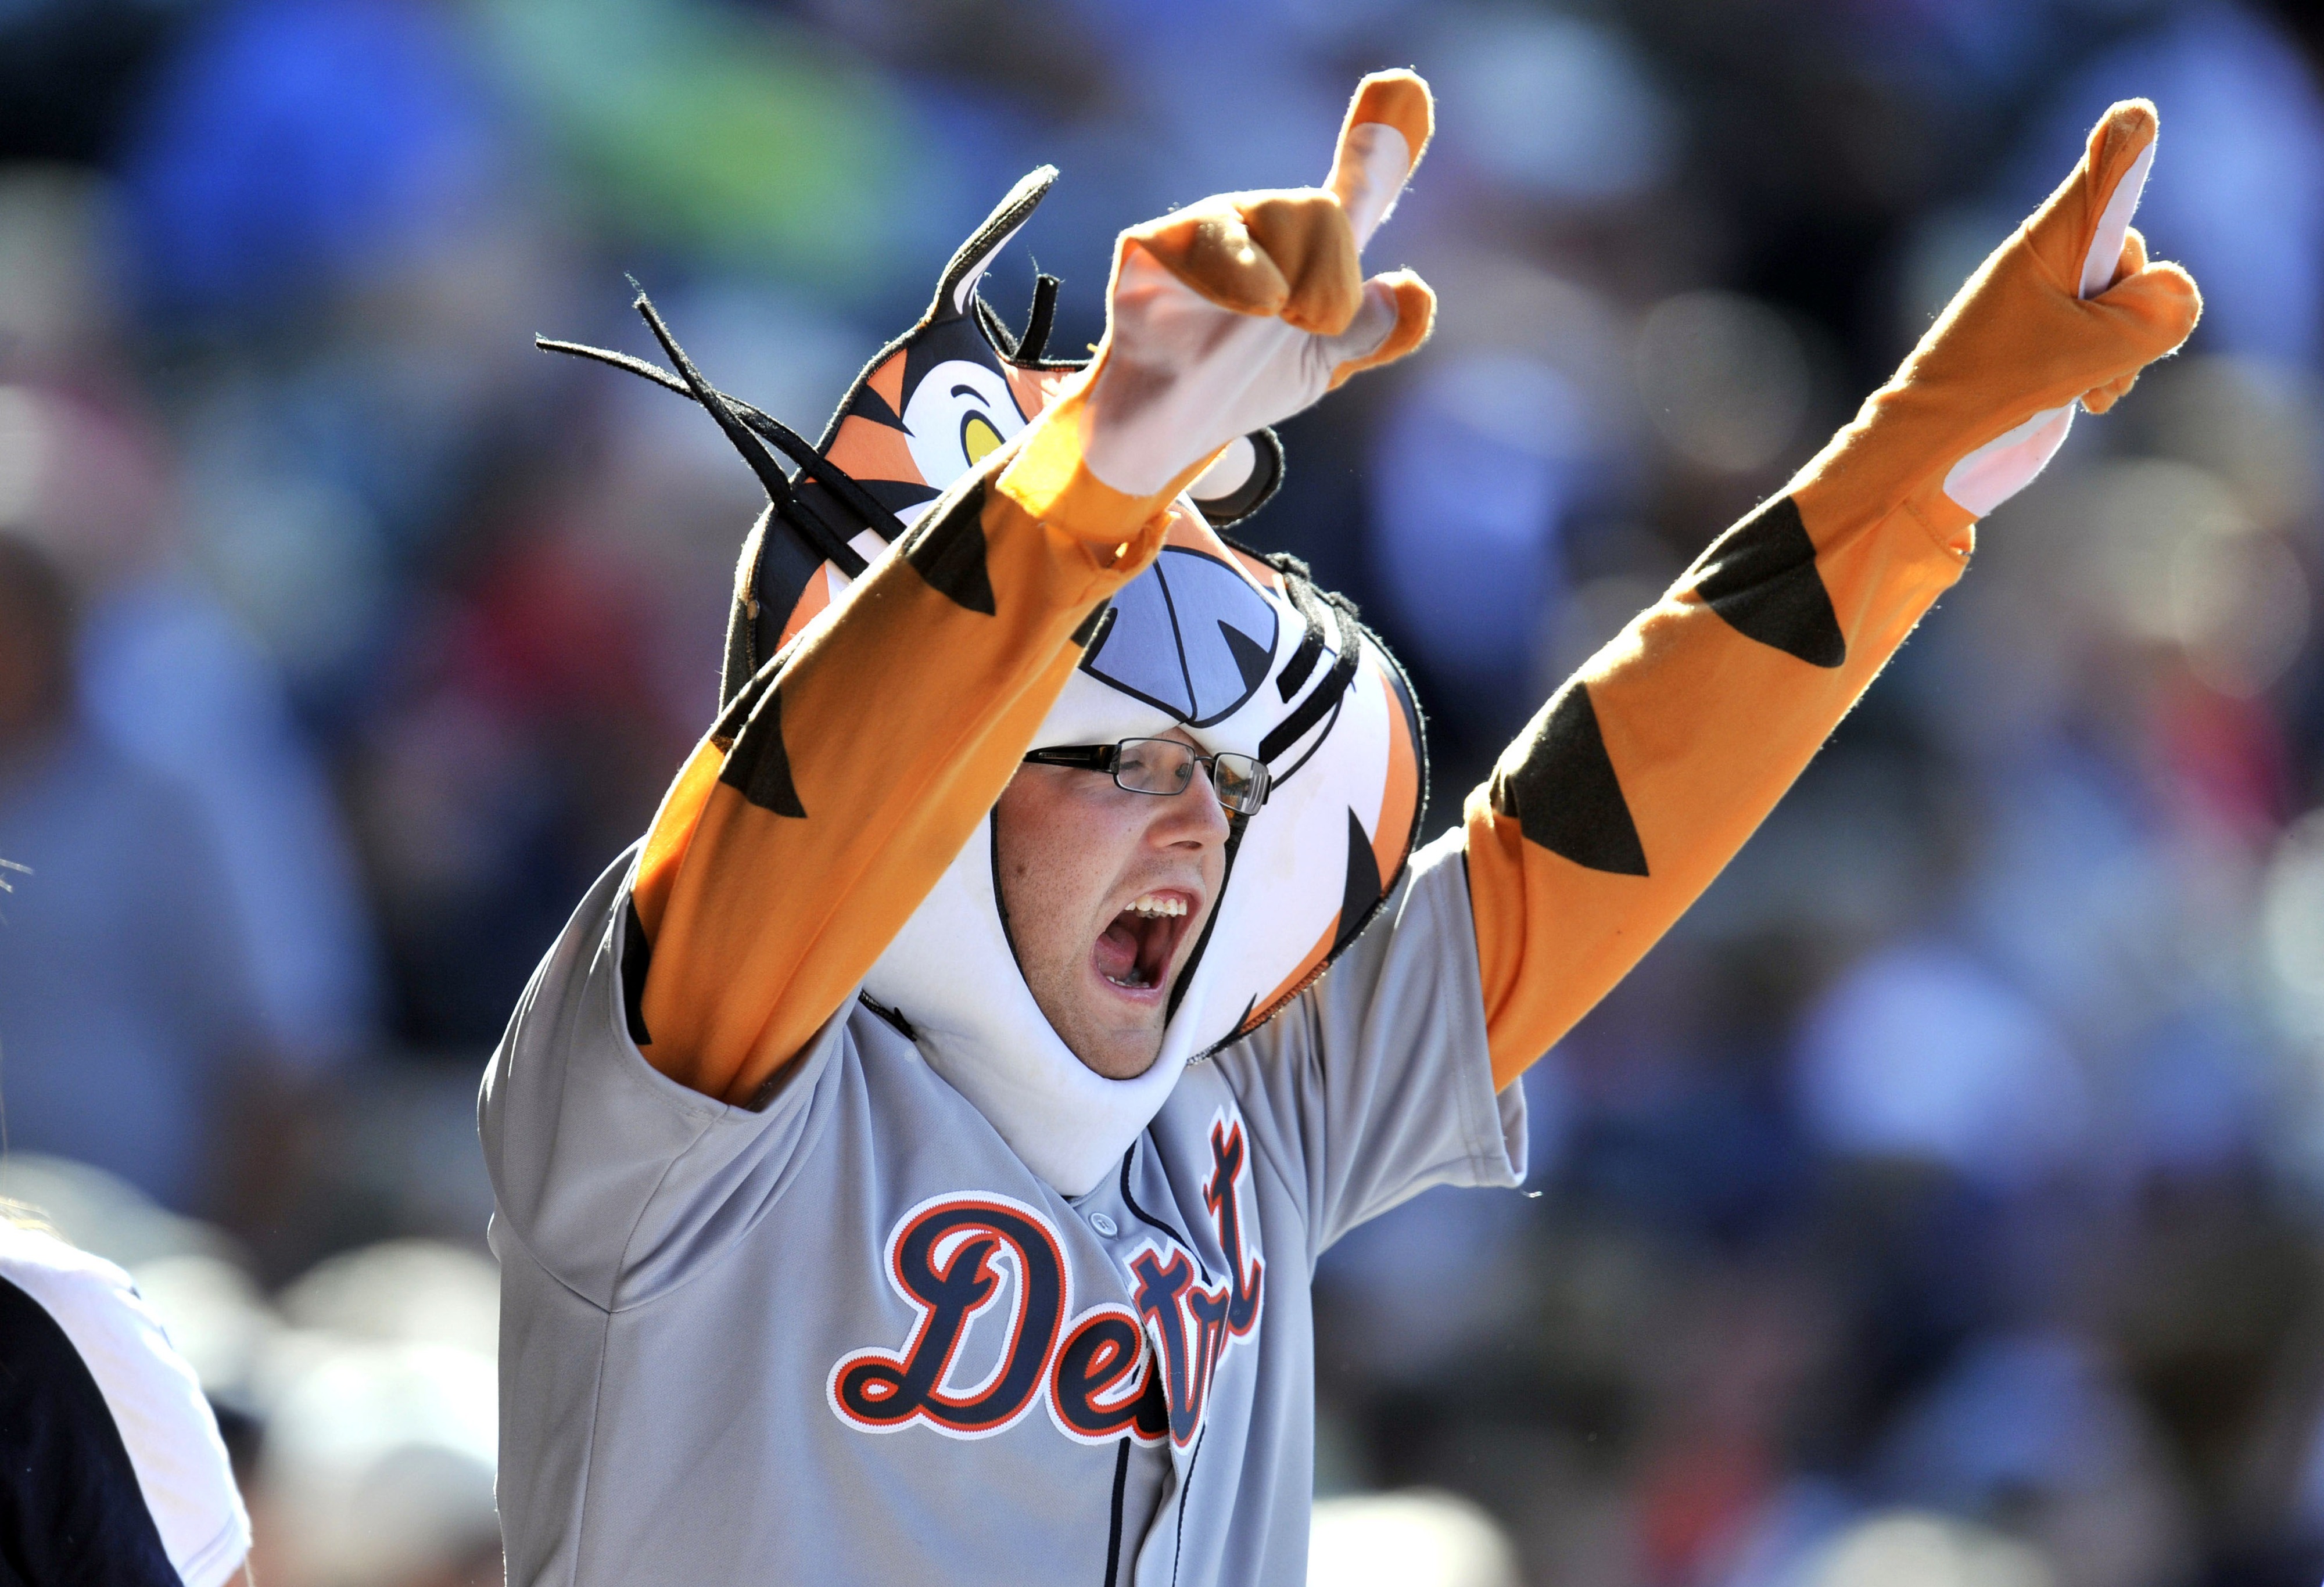 Sep 16, 2012; Cleveland, OH, USA; Detroit Tigers fan cheers during a game against the Cleveland Indians at Progressive Field. Mandatory Credit: David Richard-US PRESSWIRE